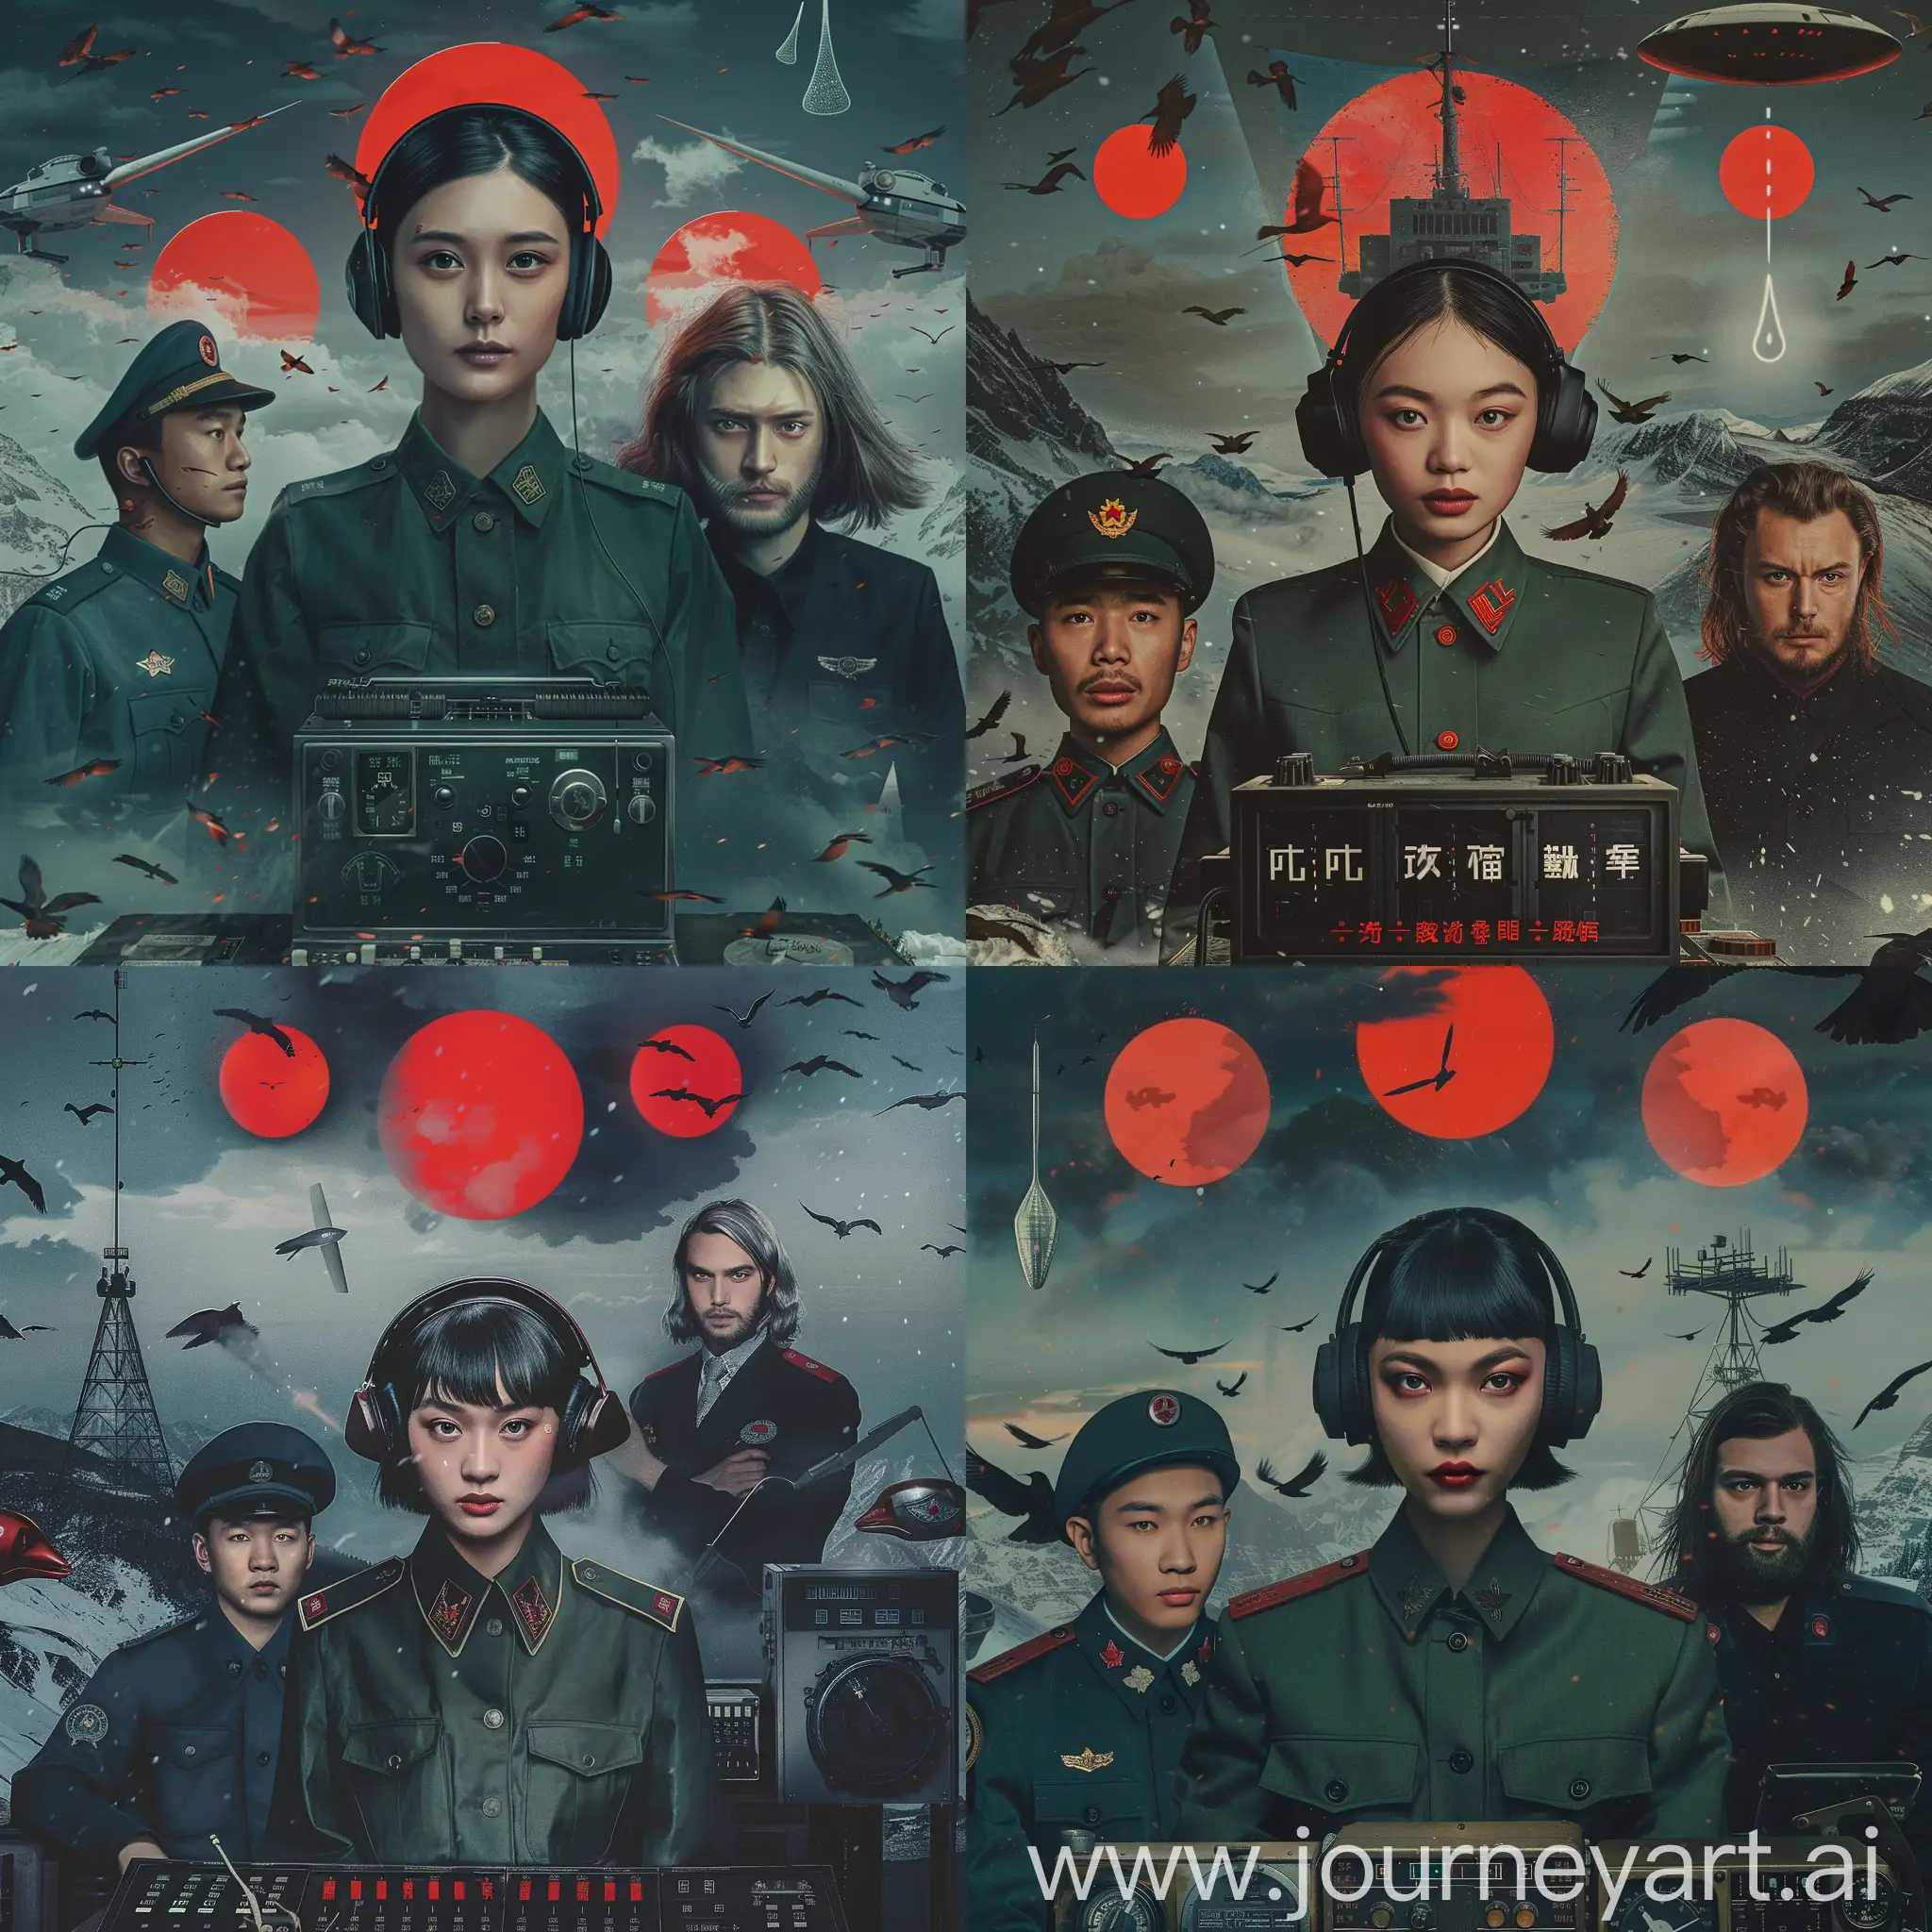 Revolutionary-Trio-Chinese-Lady-Soldier-and-American-Scientist-in-Movie-Poster-Style